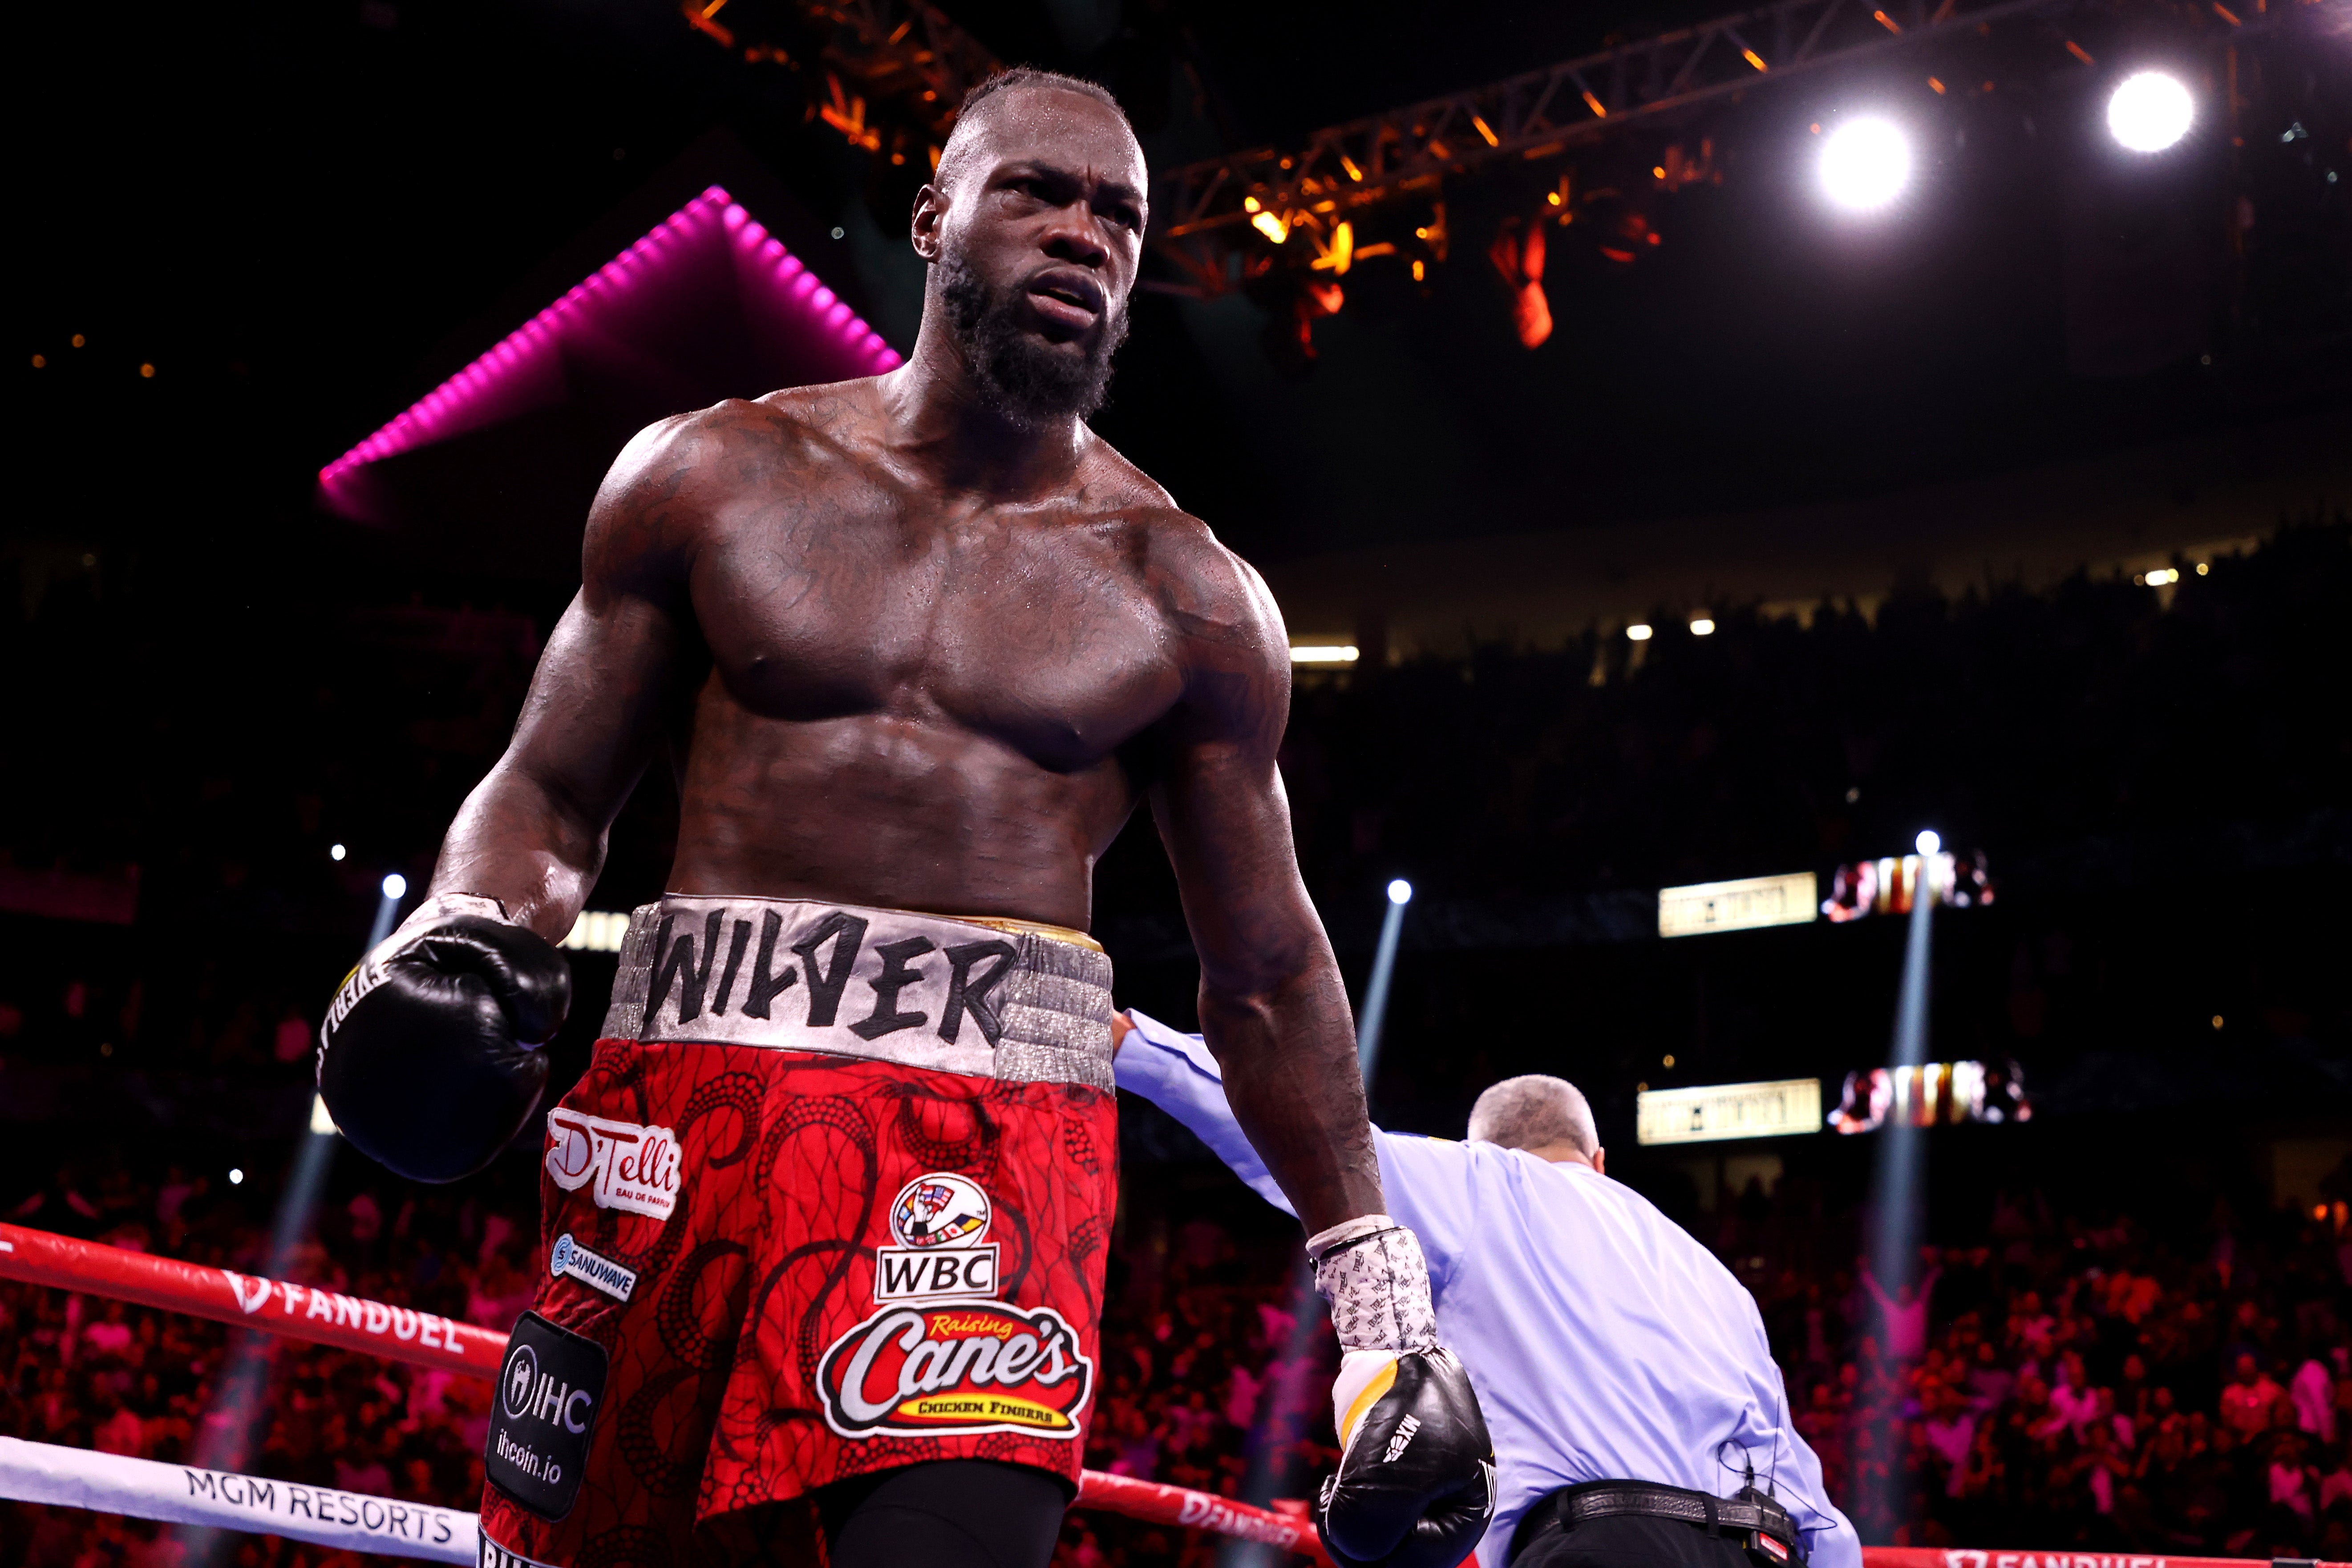 Wilder was defeated by Tyson Fury in October